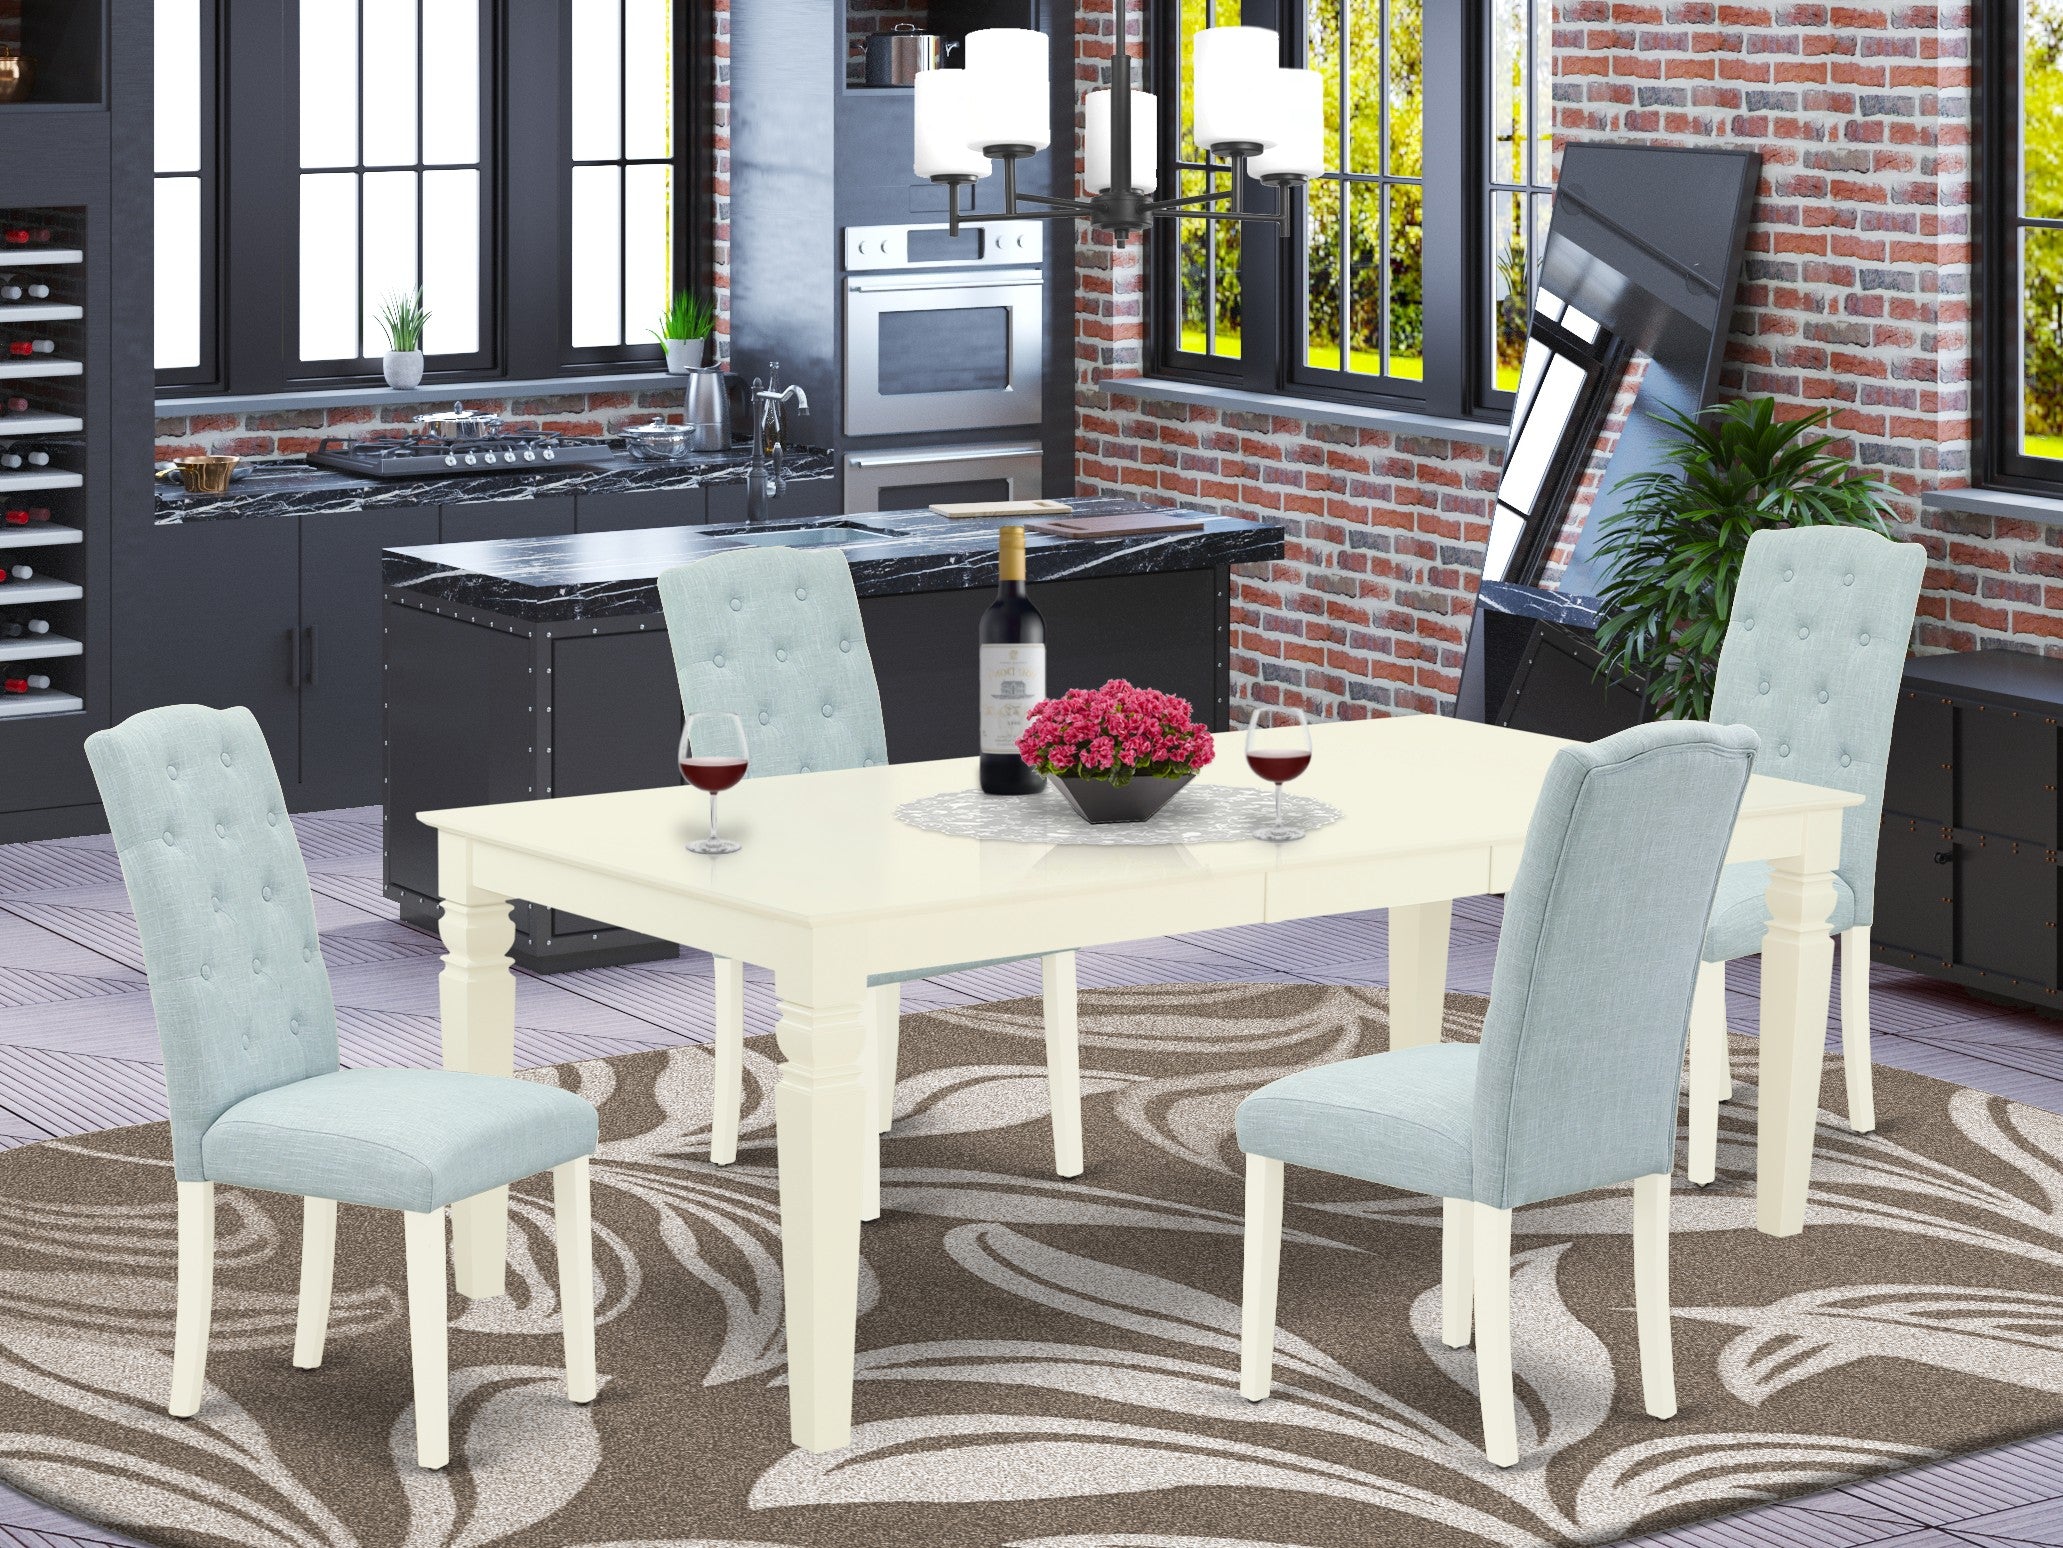 LGCE5-LWH-15 5Pc Dining Set Includes a Rectangle Dining Table with Butterfly Leaf and Four Parson Chairs with Baby Blue Fabric, Linen White Finish